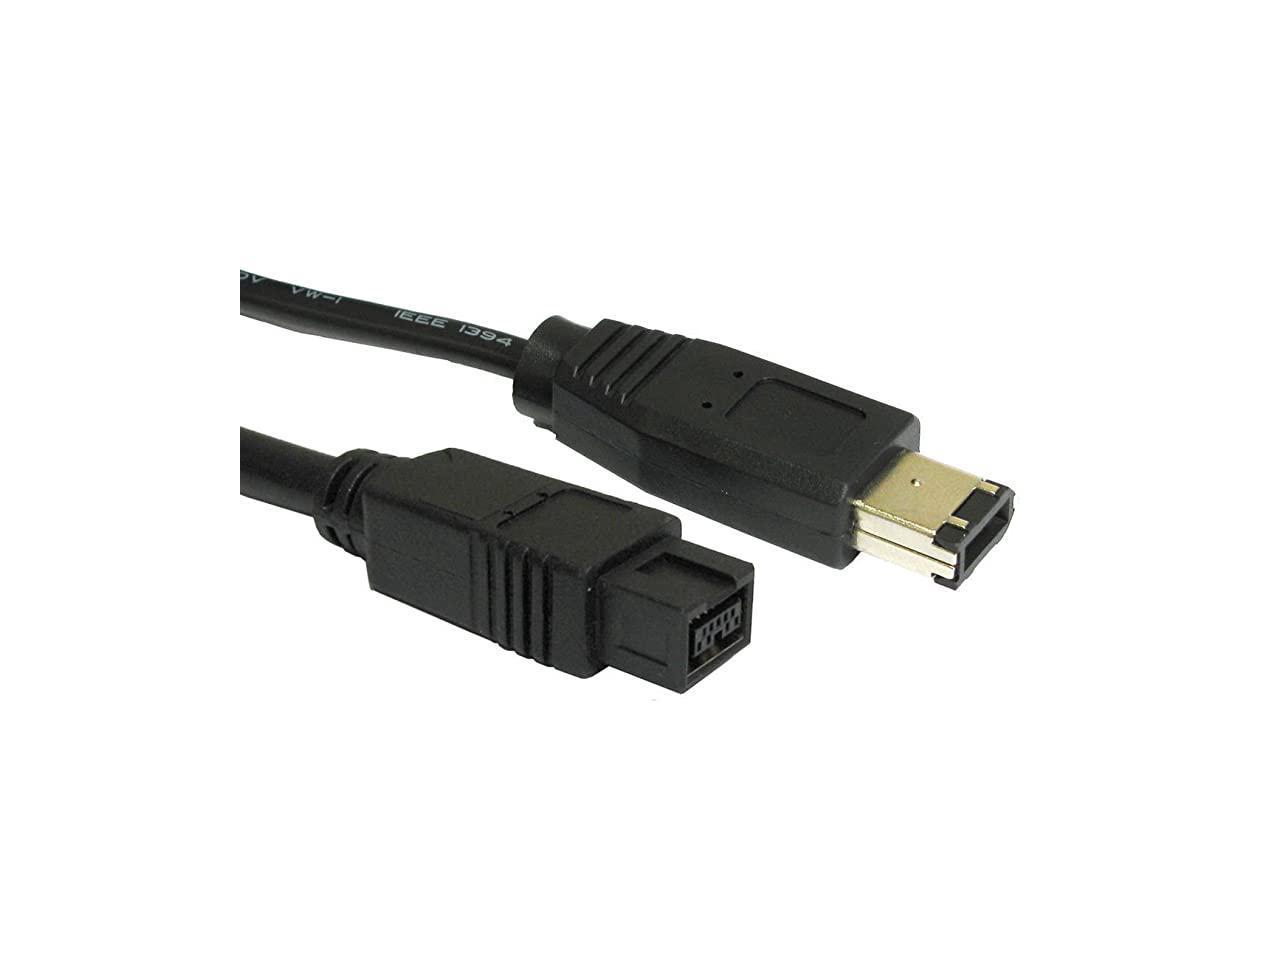 10 Feet Apple and Sony iLink Devices 10Ft FireWire Cable IEEE1394b 9pin-9pin 800Mbps Compatible with Windows 